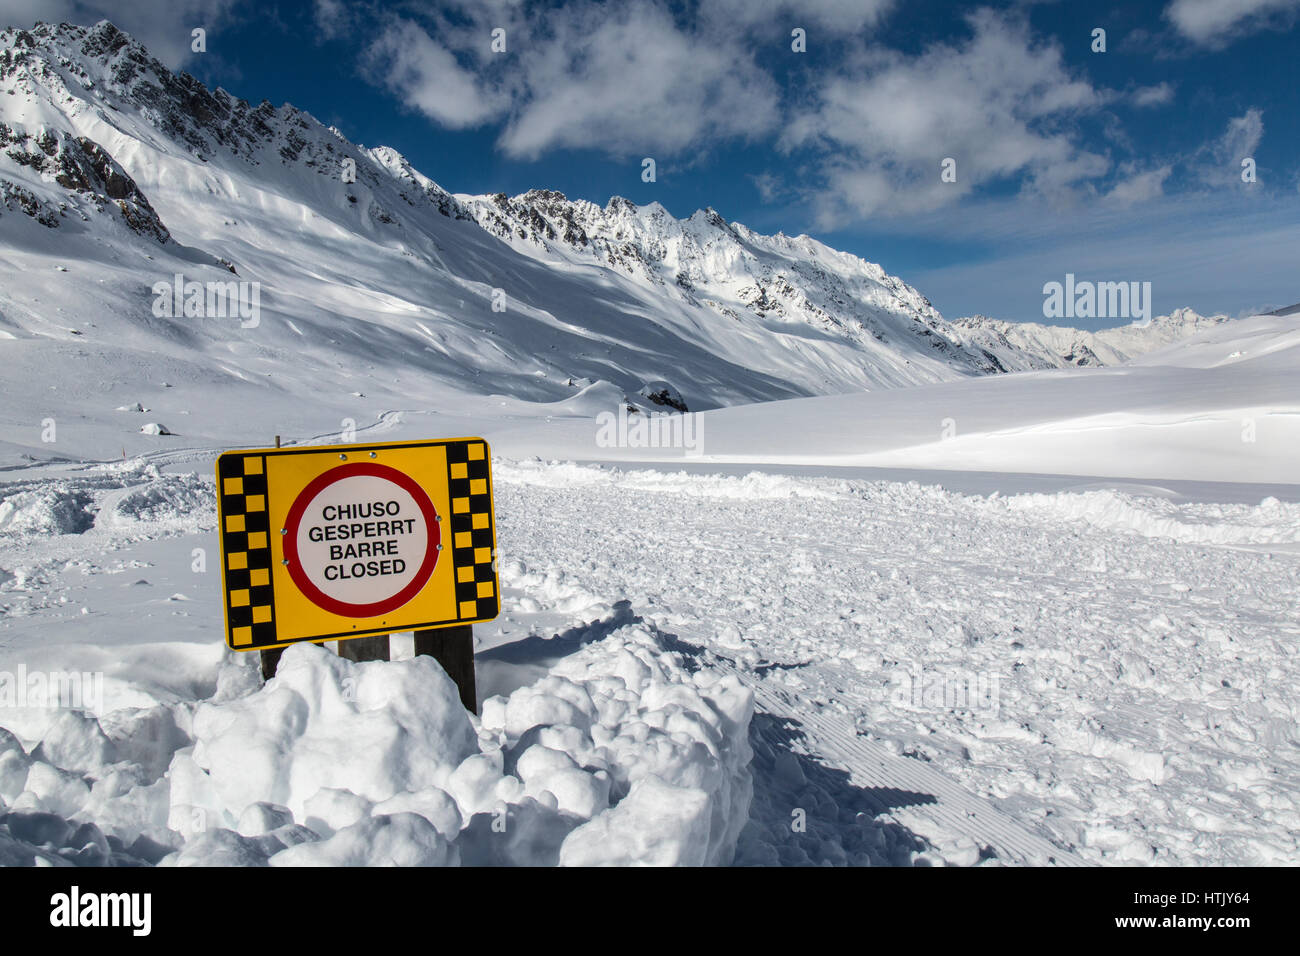 Sign saying ' Chiuso Gesperrt Barre Closed'. This relates to a closed mountain track due to heavy snow fall and avalanche risk in the Austrian Alps. Stock Photo